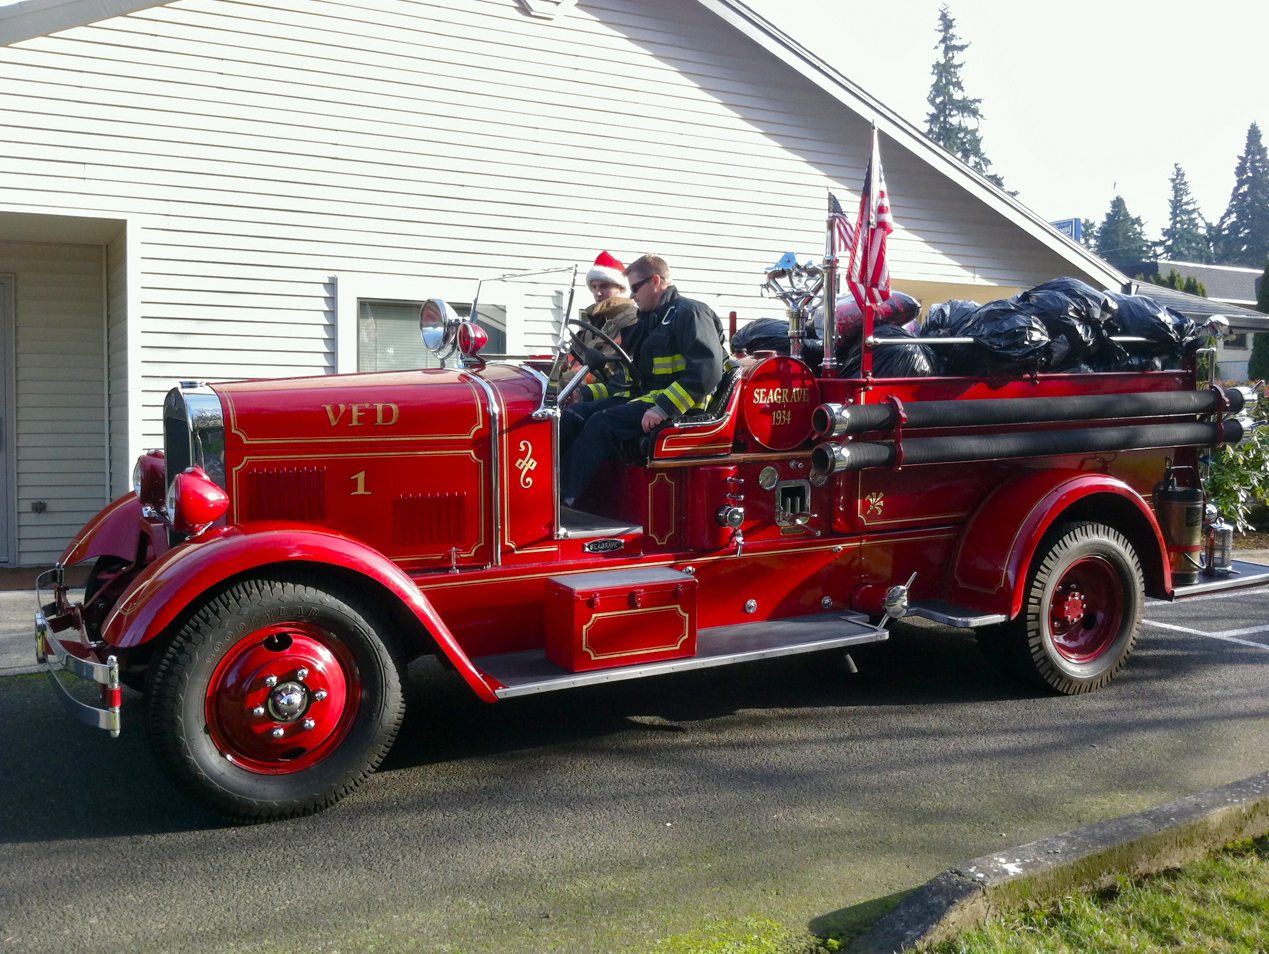 Shumway: Firefighters Scott Branton, driving, and Mike Hamilton deliver coats, blankets and baby food to Open House Ministries on Christmas Eve day in a 1934 fire engine.